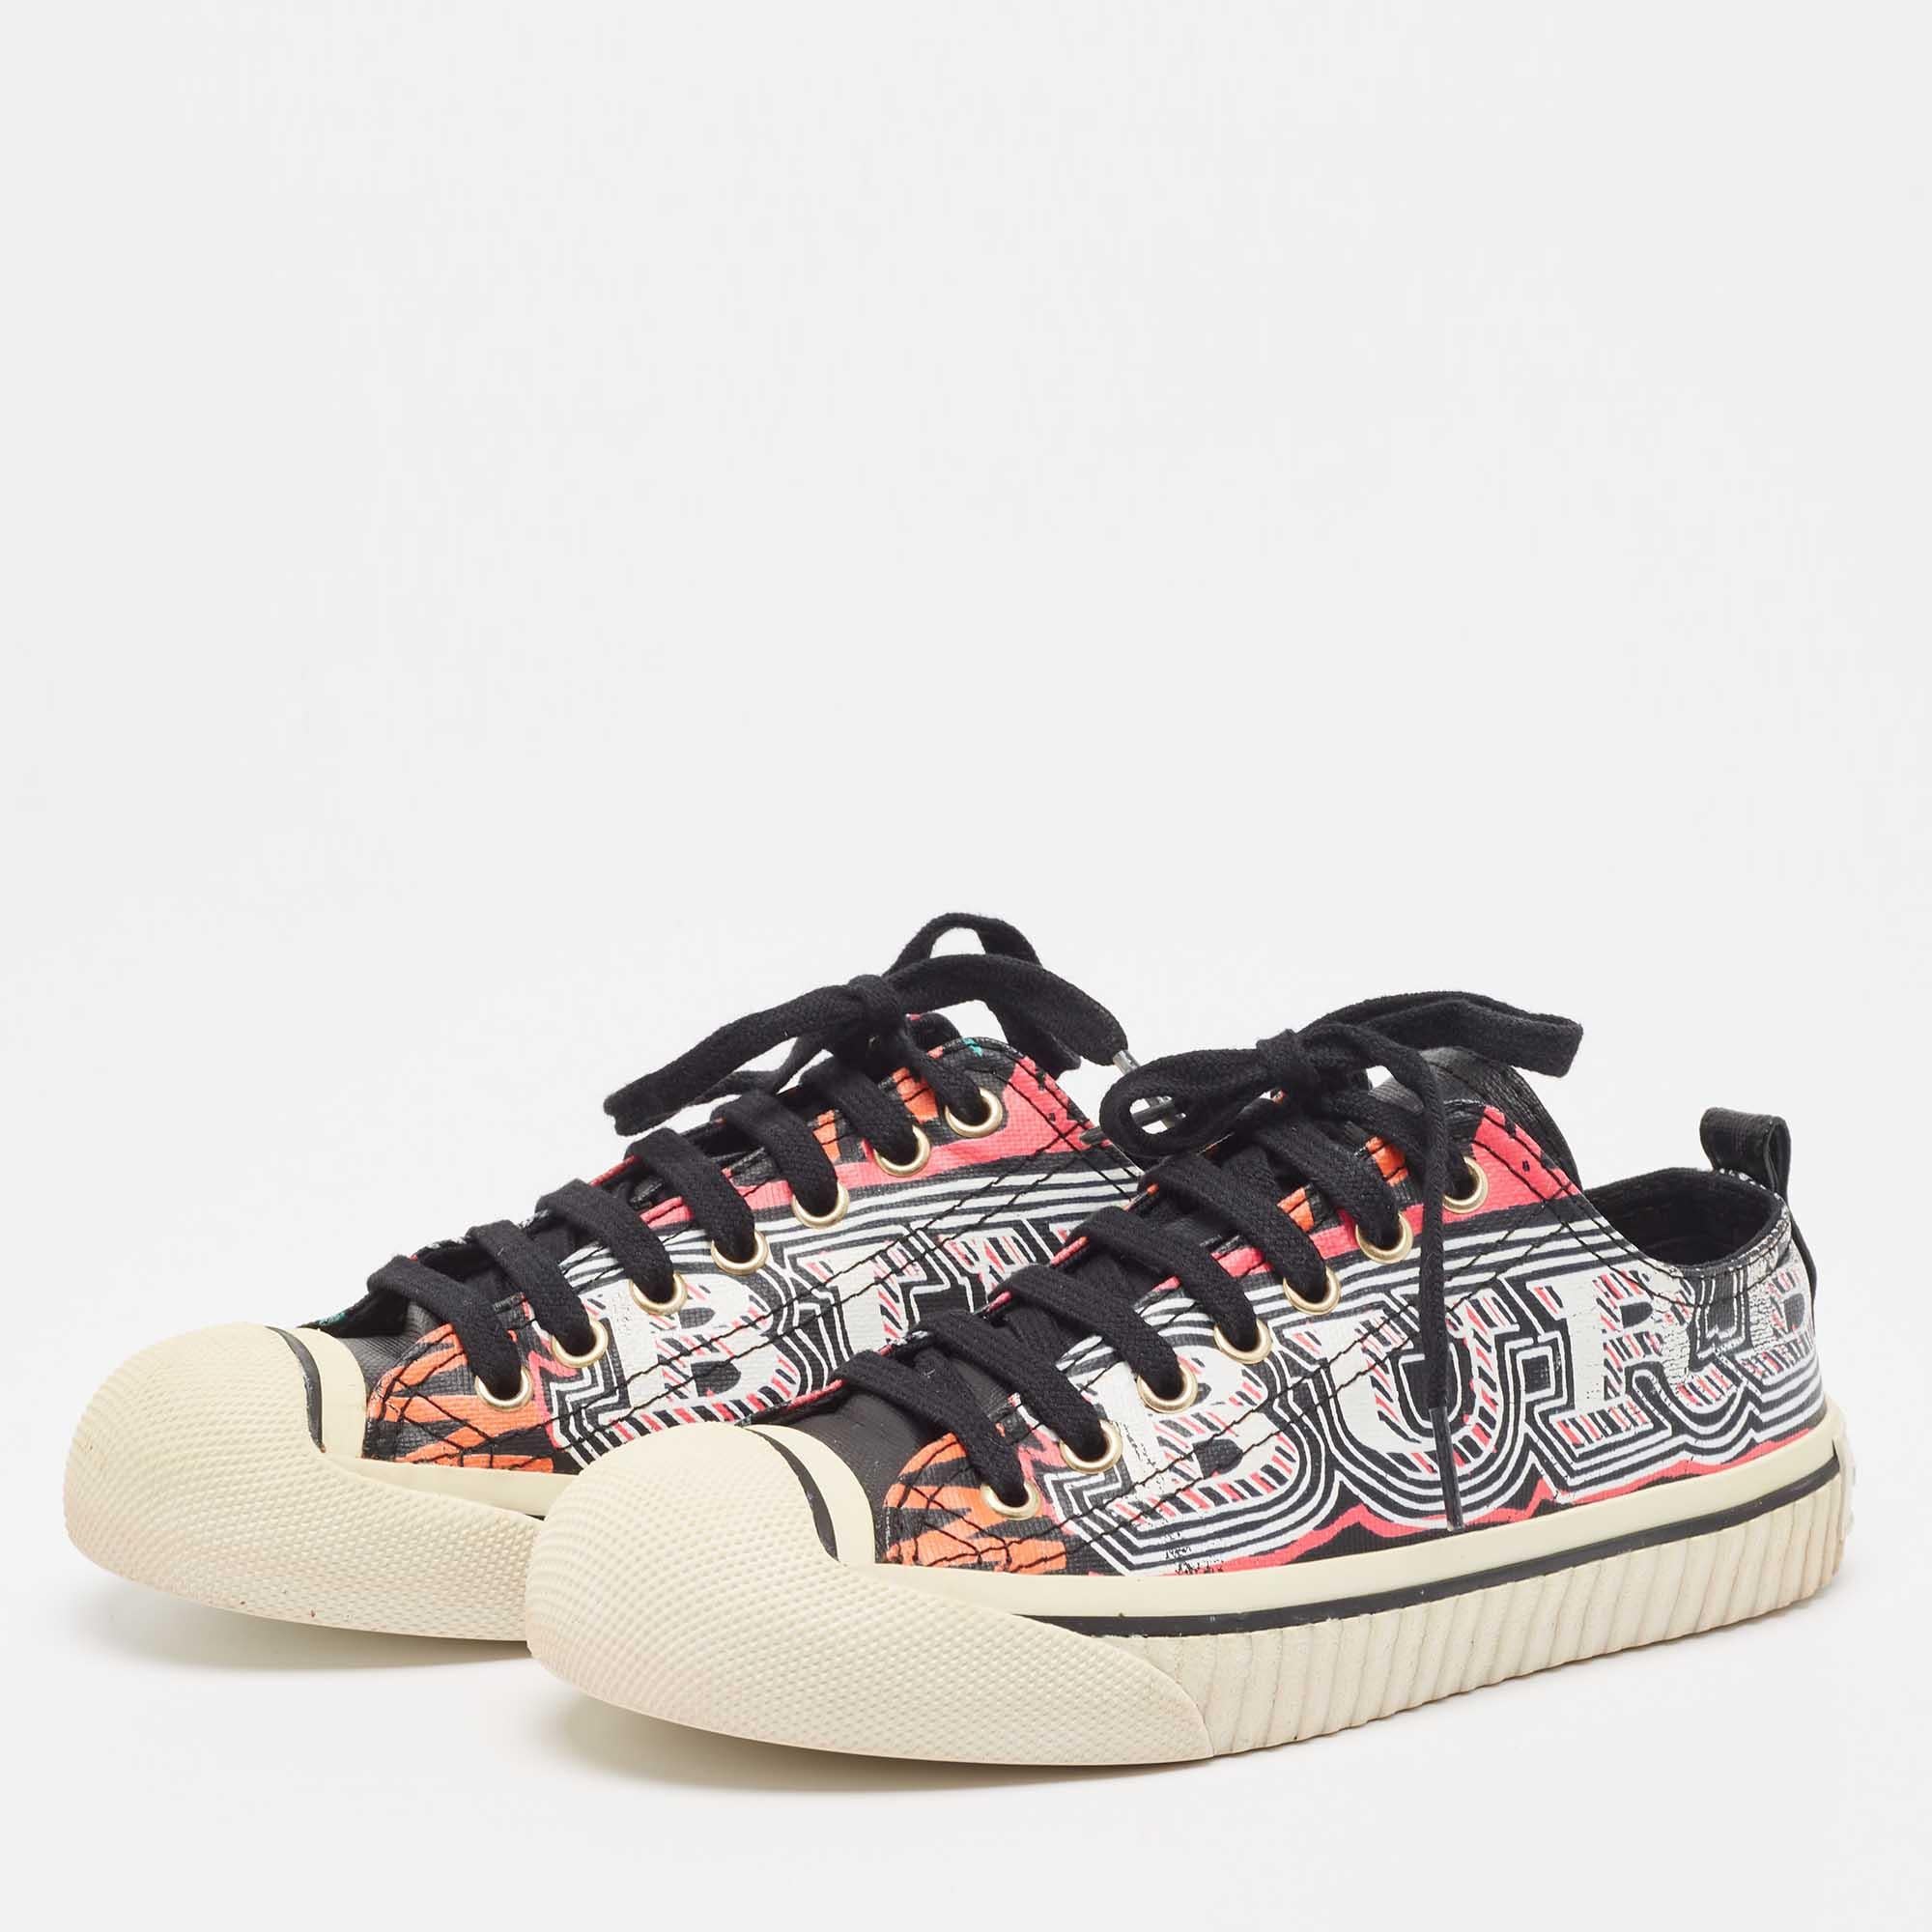 Fashioned to take your style a notch higher, these low top sneakers from Burberry are absolutely worth the dream and the splurge! They've been crafted from canvas and styled with laces on the vamps and Kingly Mark prints all over.

